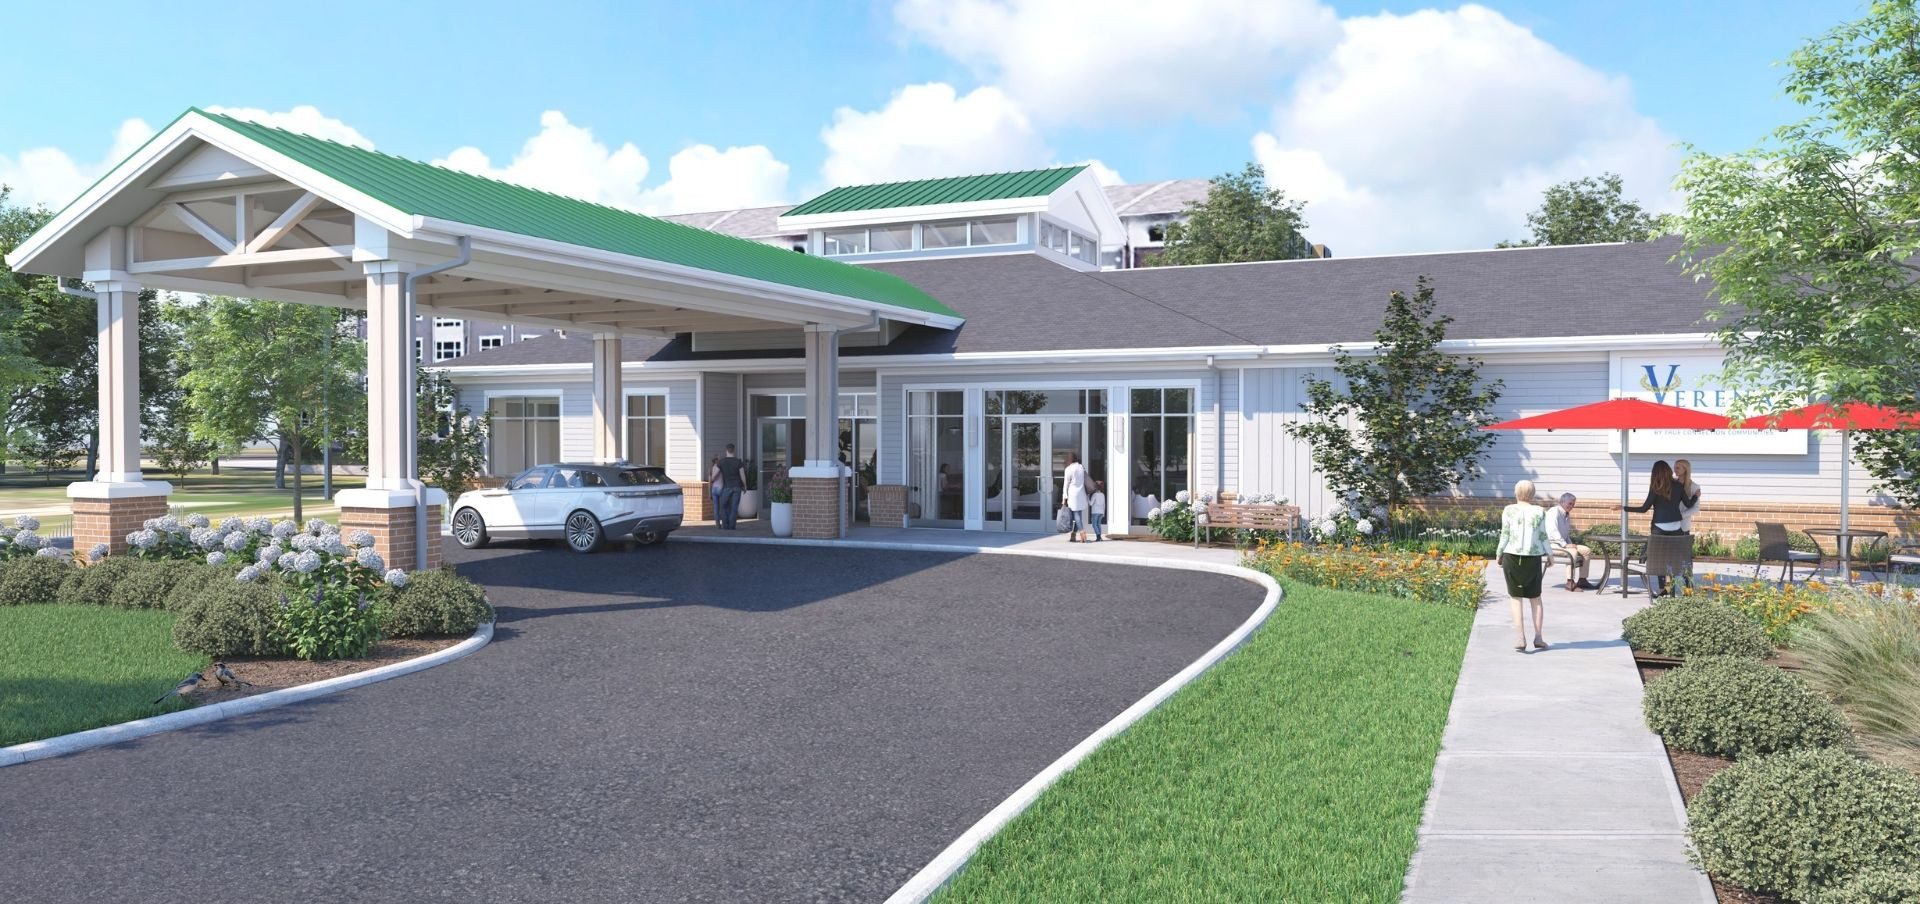 rendering of exterior entrance at verena at hilliard independent living community in hilliard, ohio